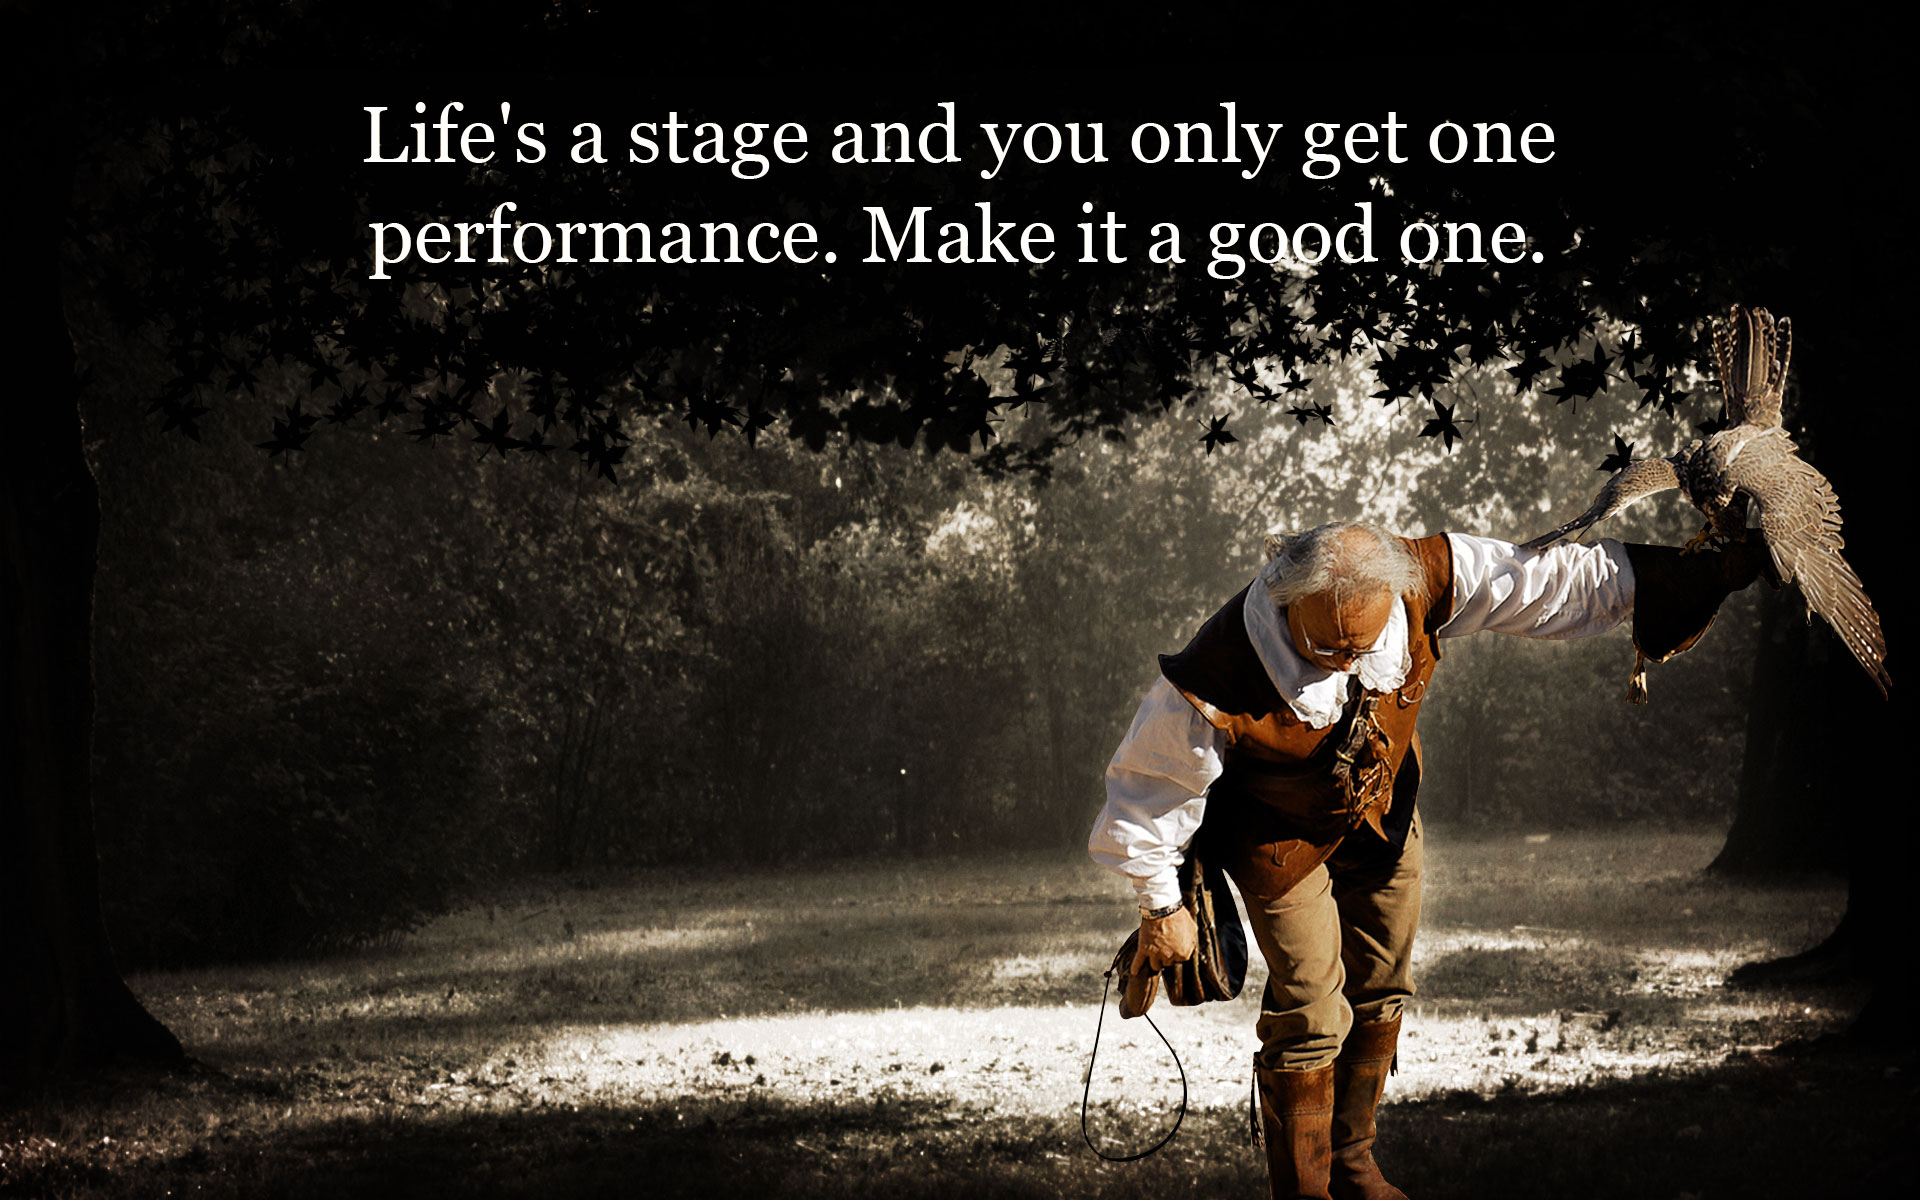 Life’s a stage and you only get one performance. Make it a good one